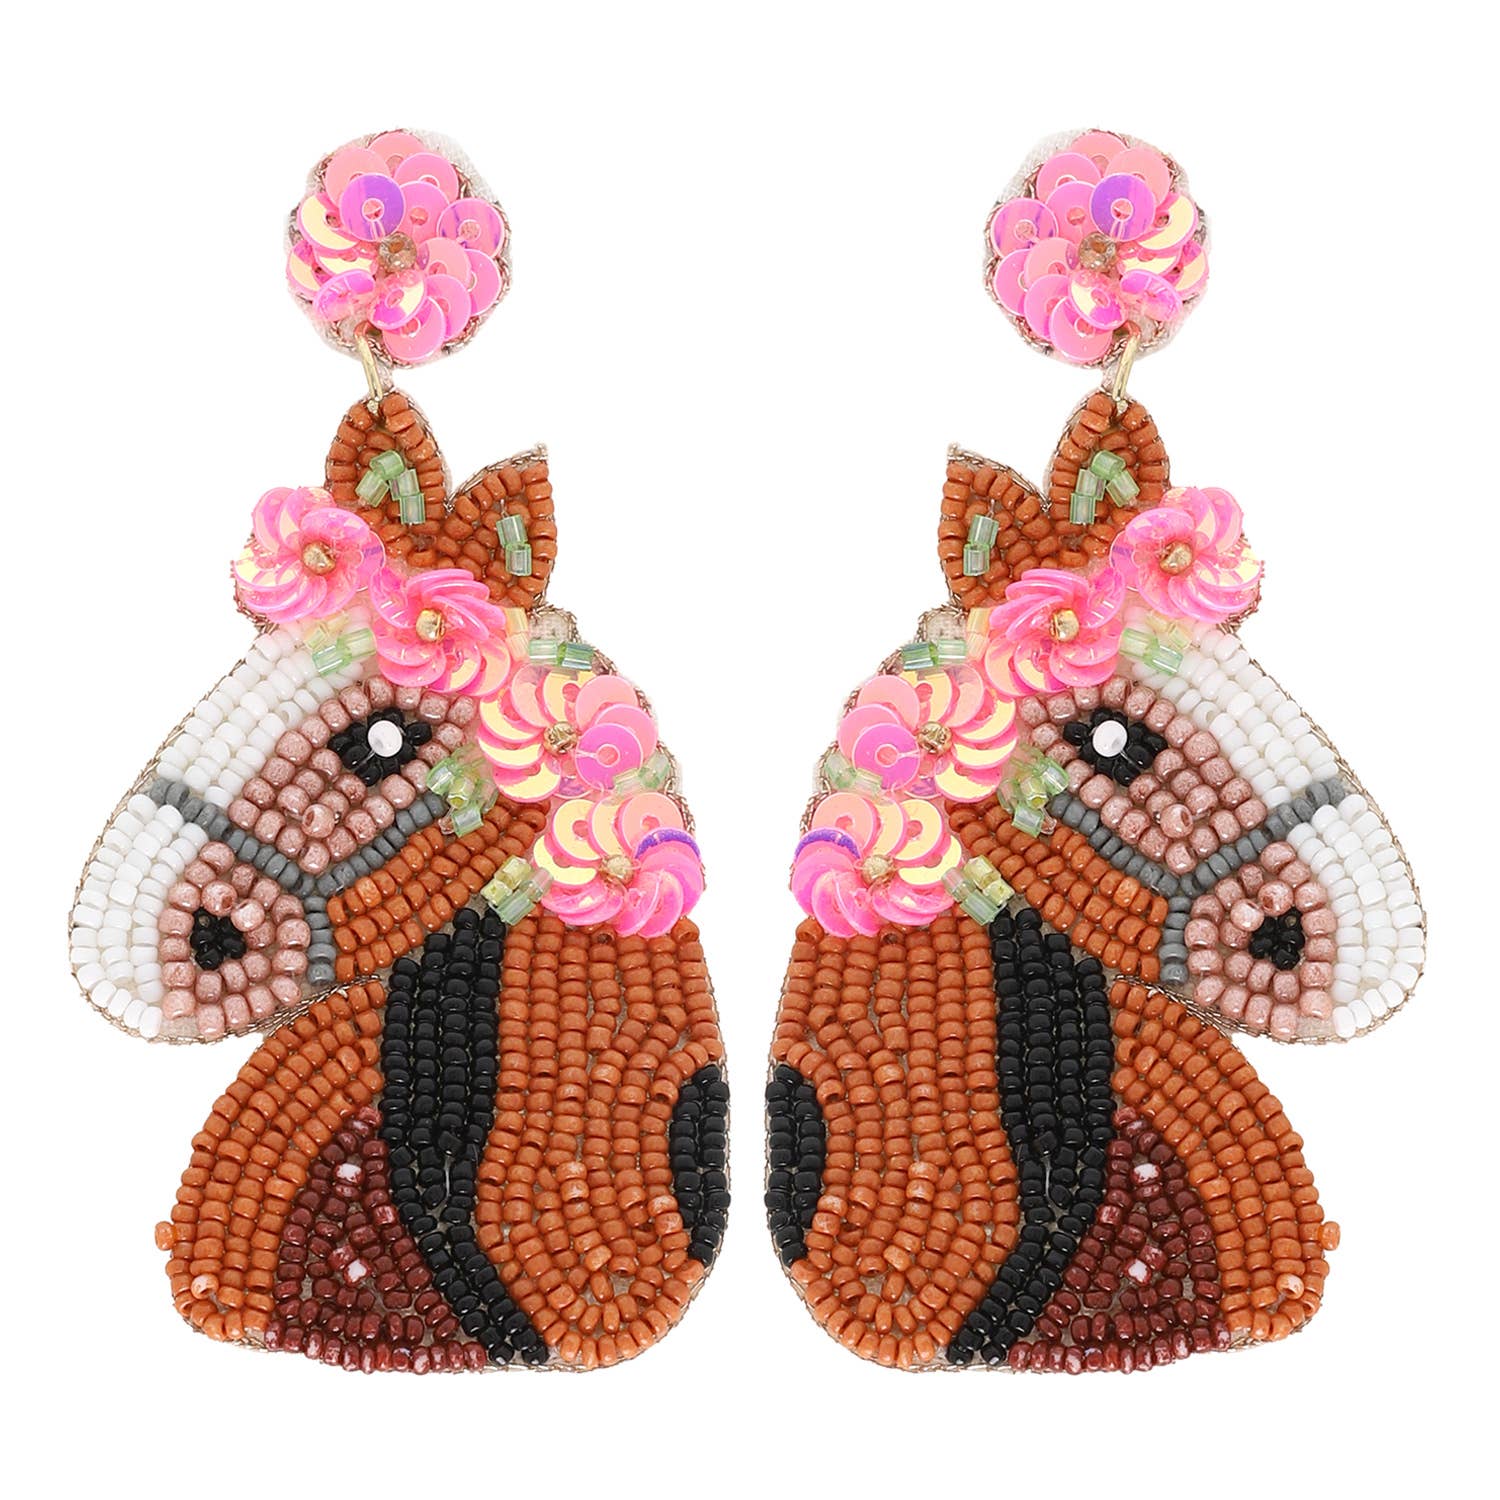 Run for The Roses Horse Beaded Embroidery Earrings